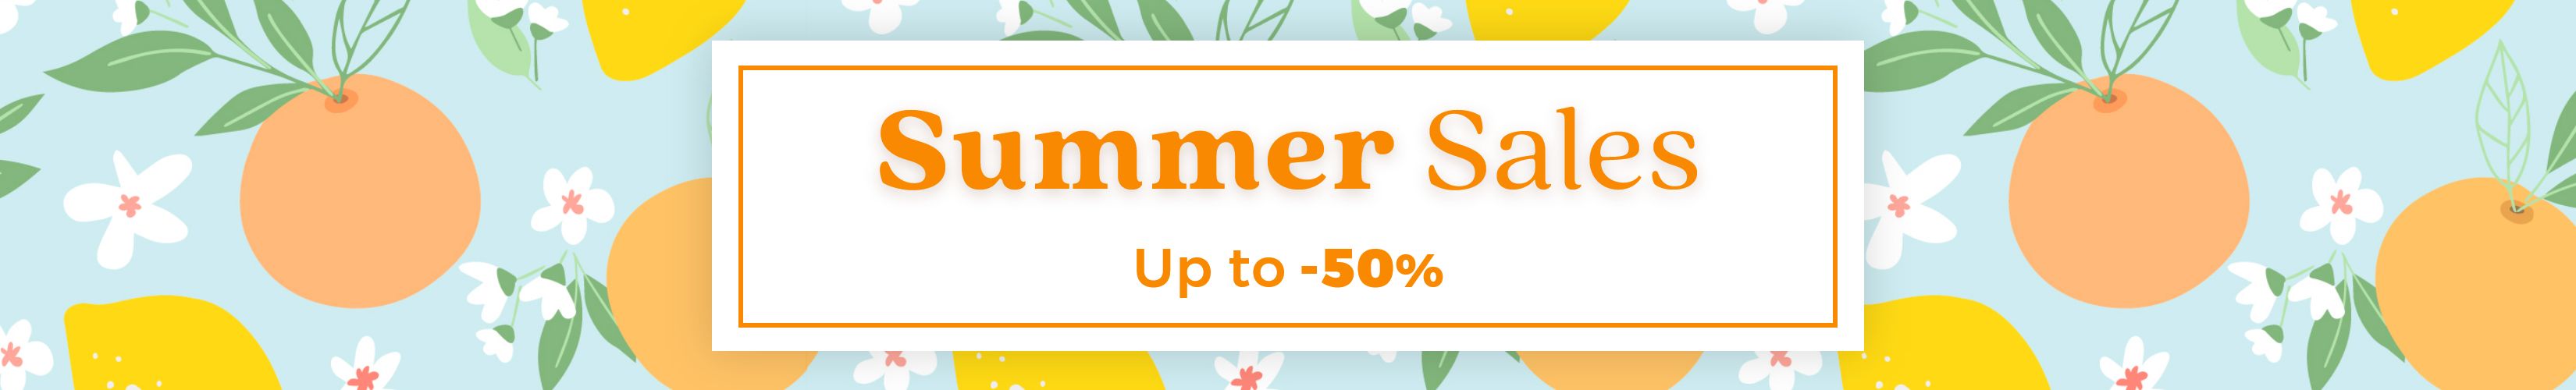 SUMMER SALES DISCOUNTS UNTIL 50% OFF EXPIRES ON 31.07